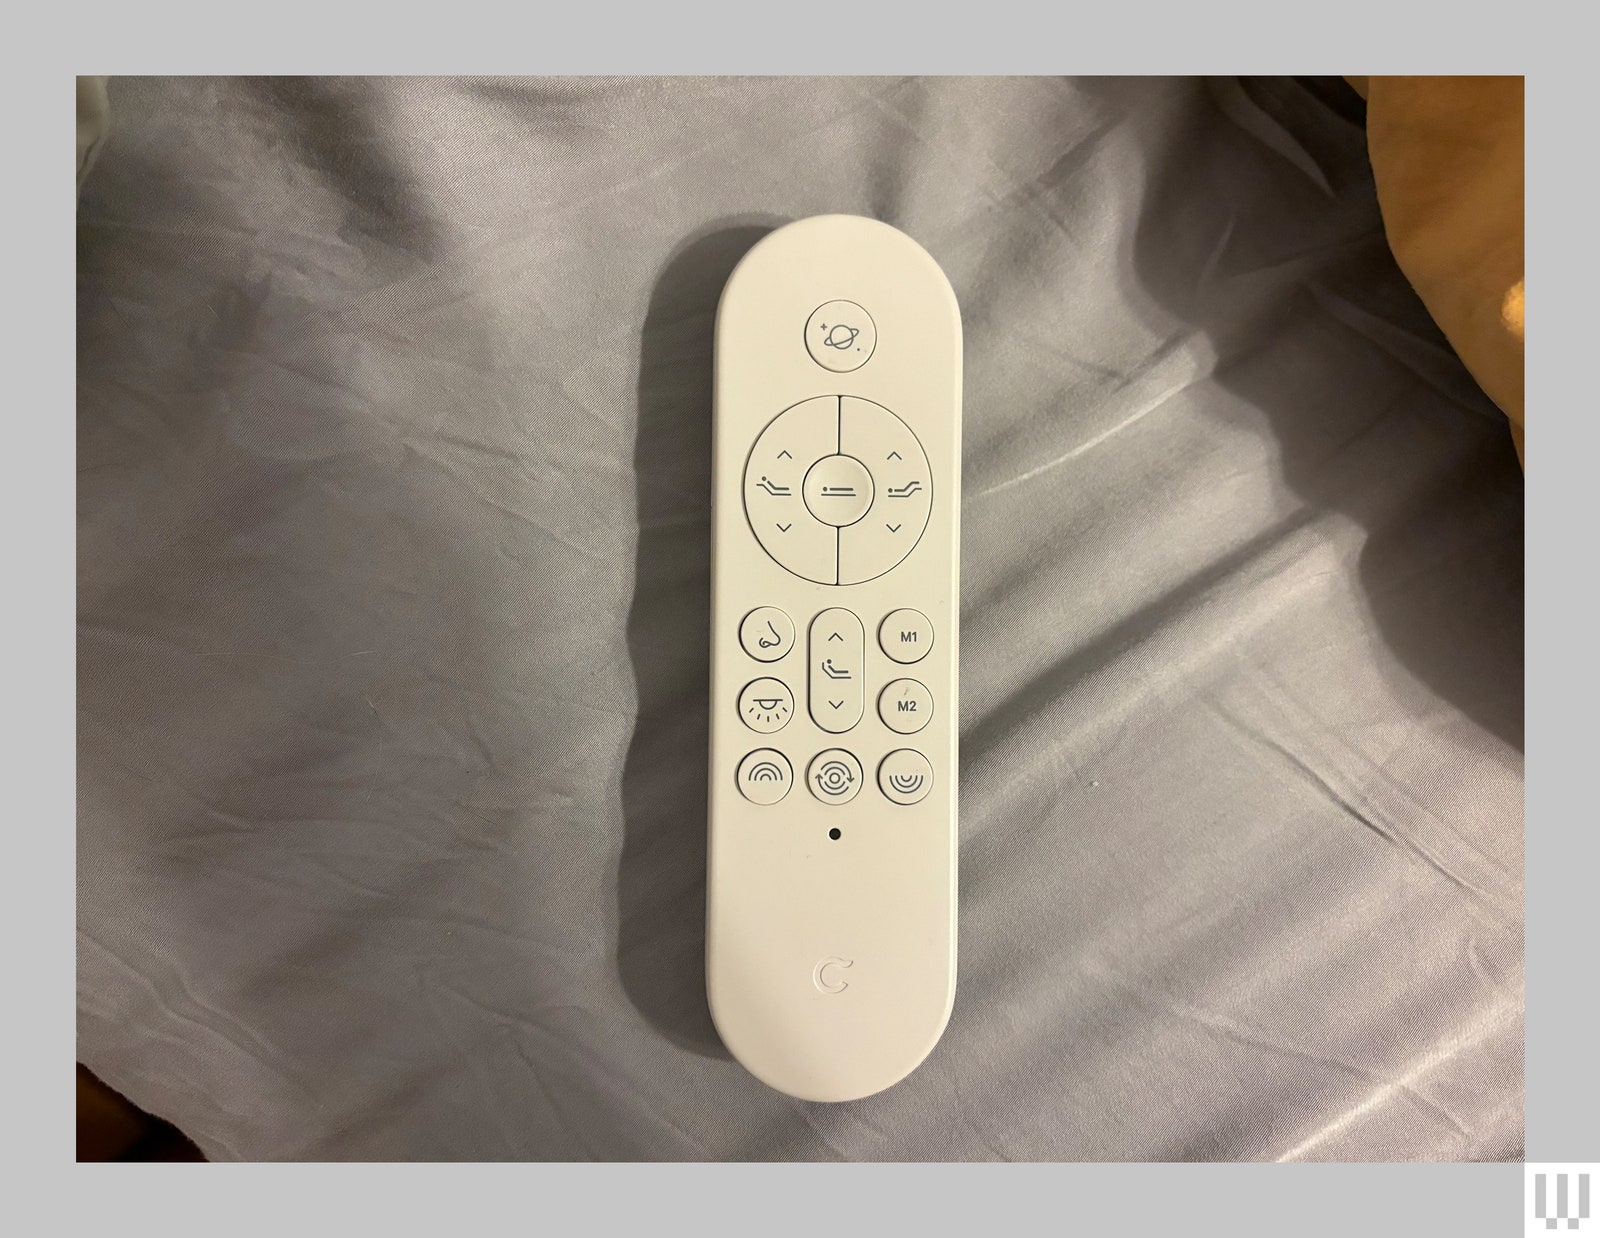 White ovalshaped remote to control an adjustable bed